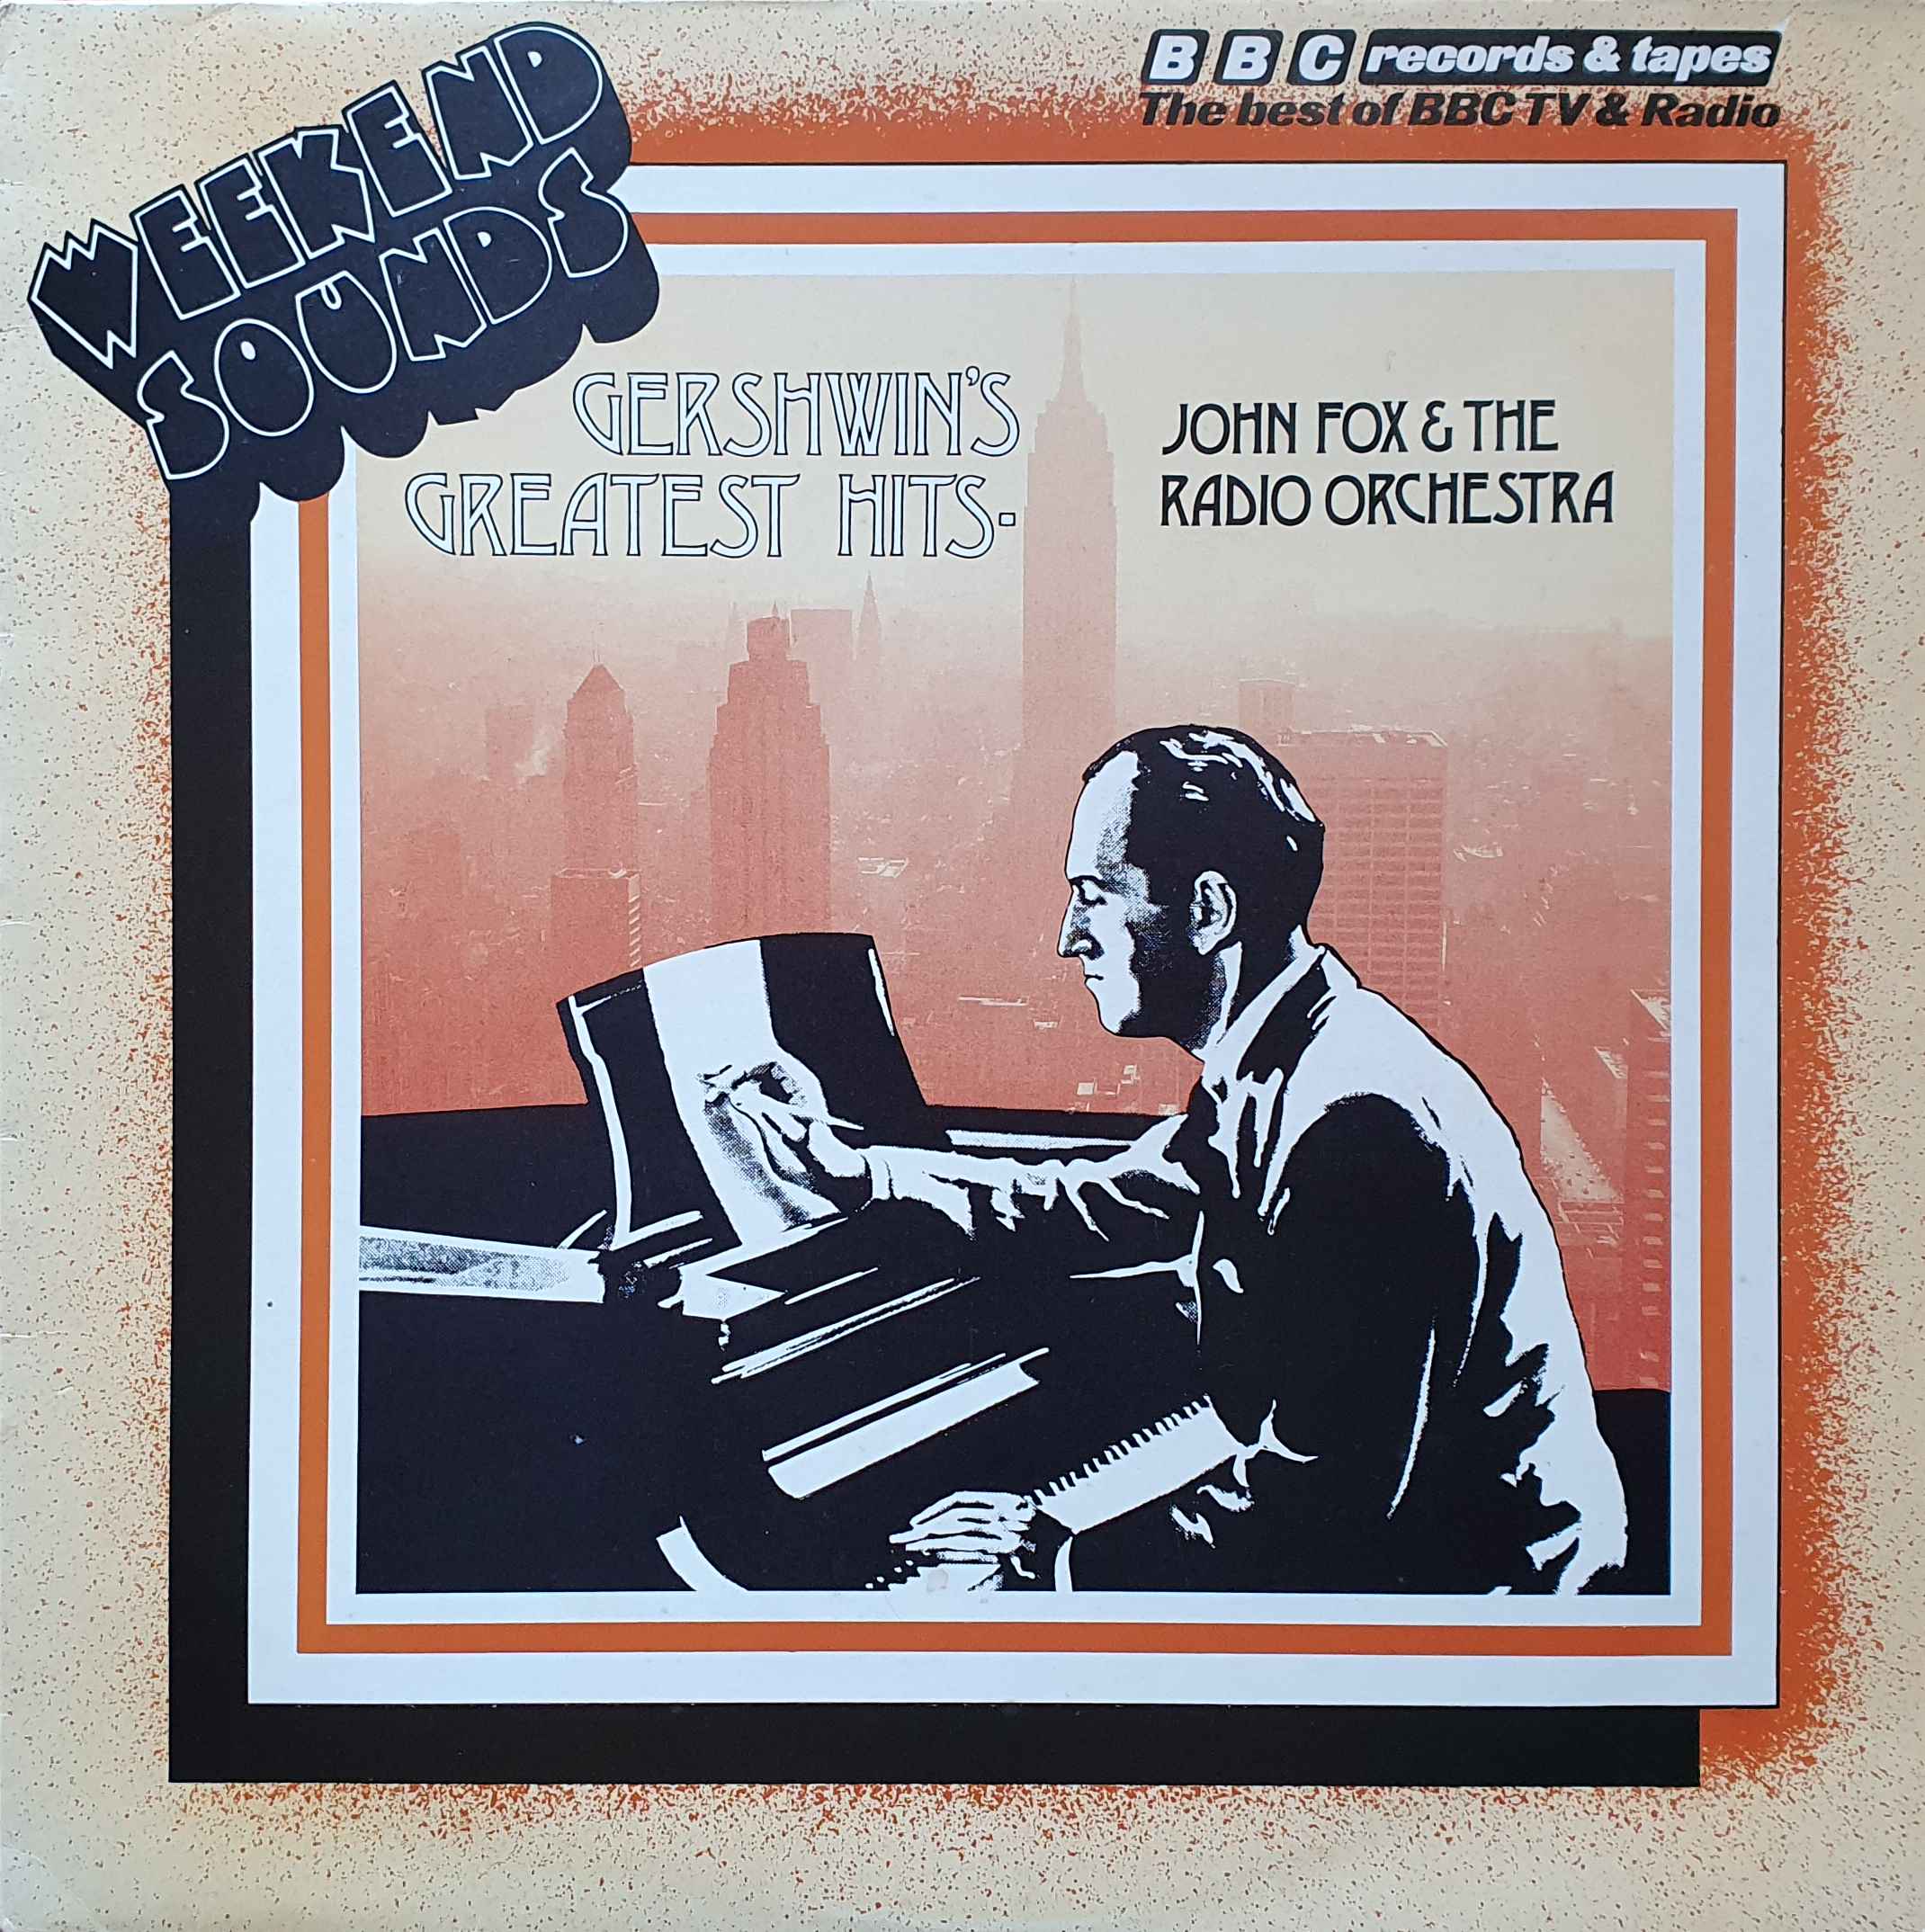 Picture of REC 320 Gershwin's greatest hits by artist John Fox and the Radio Orchestra from the BBC albums - Records and Tapes library